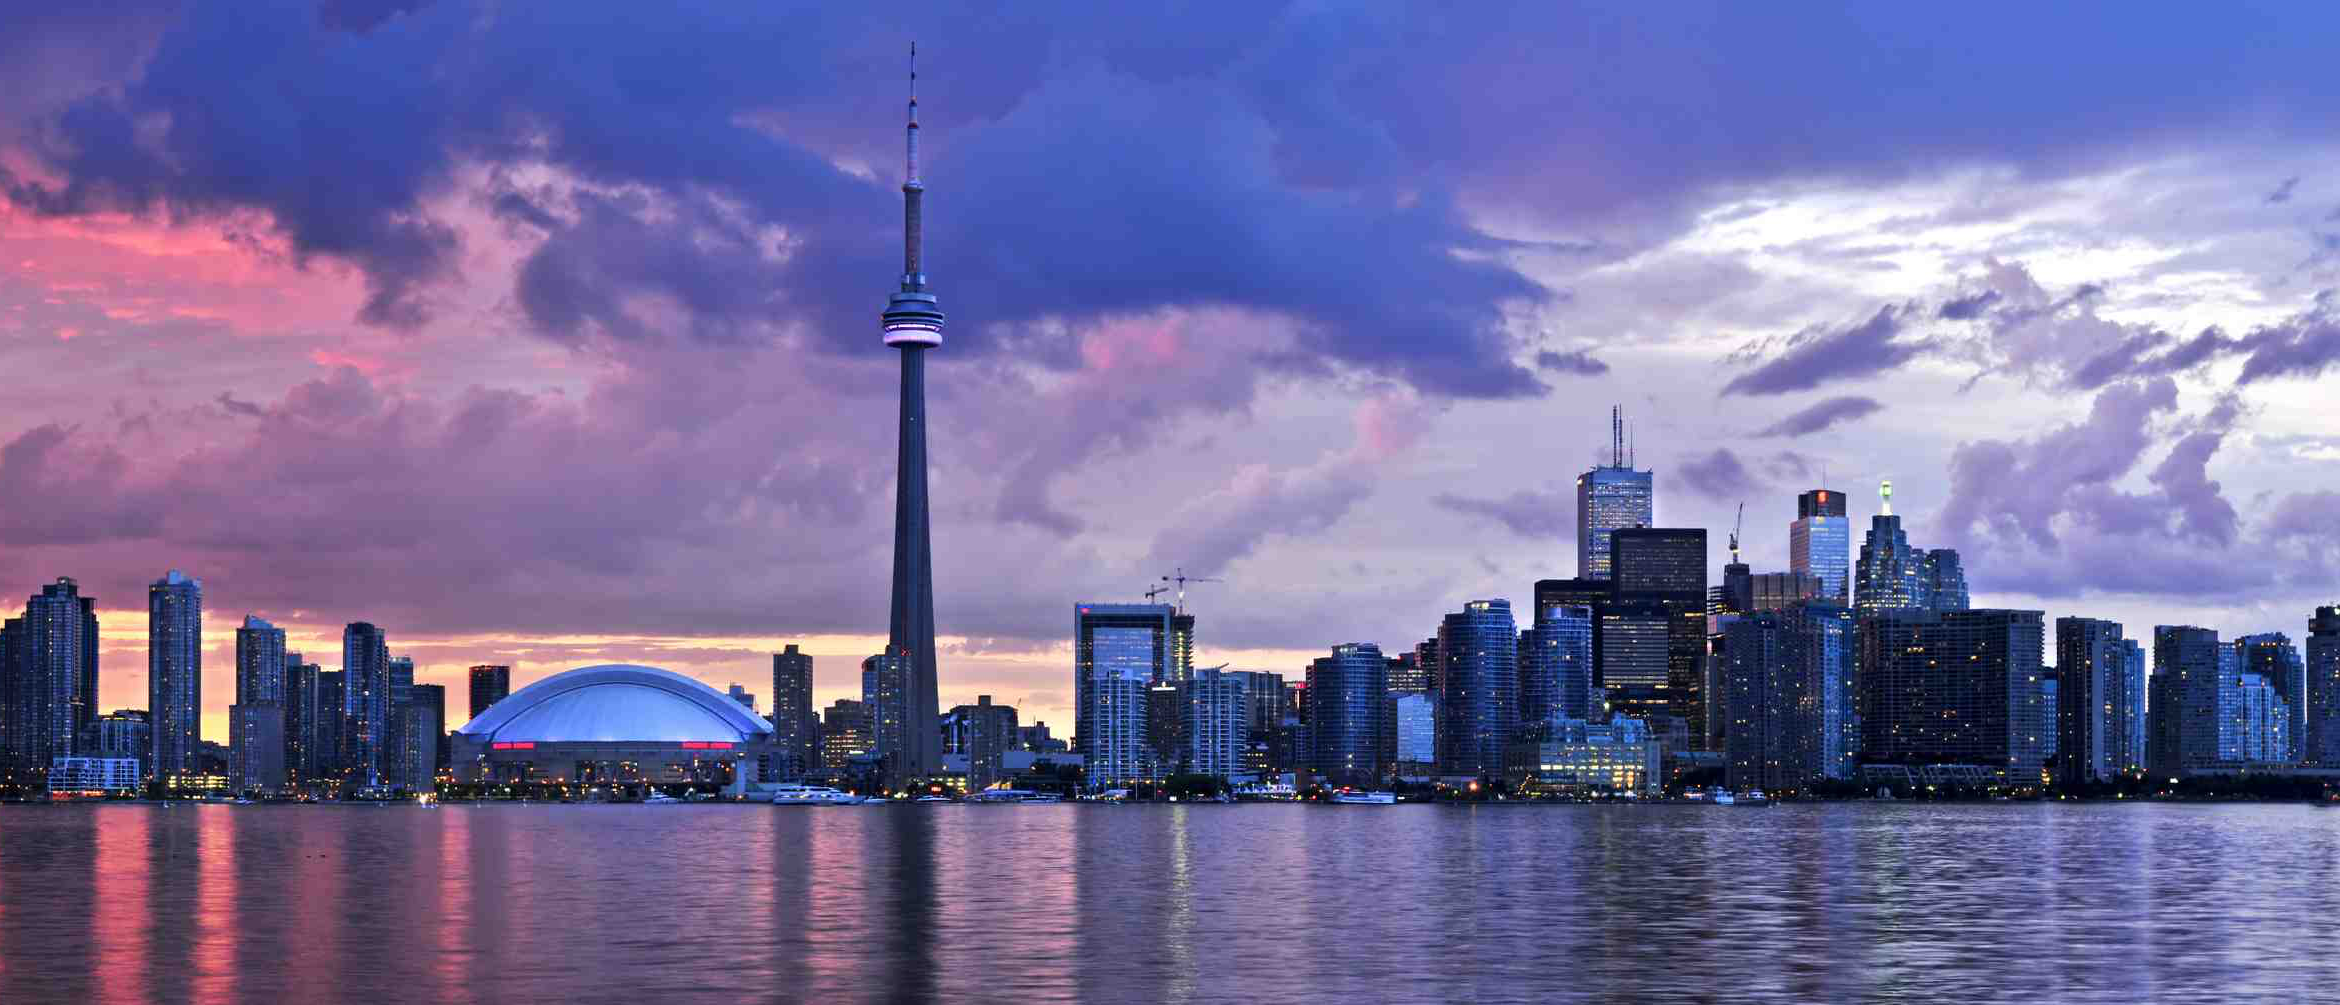 Toronto skyline against a colorful clouds at sunset.